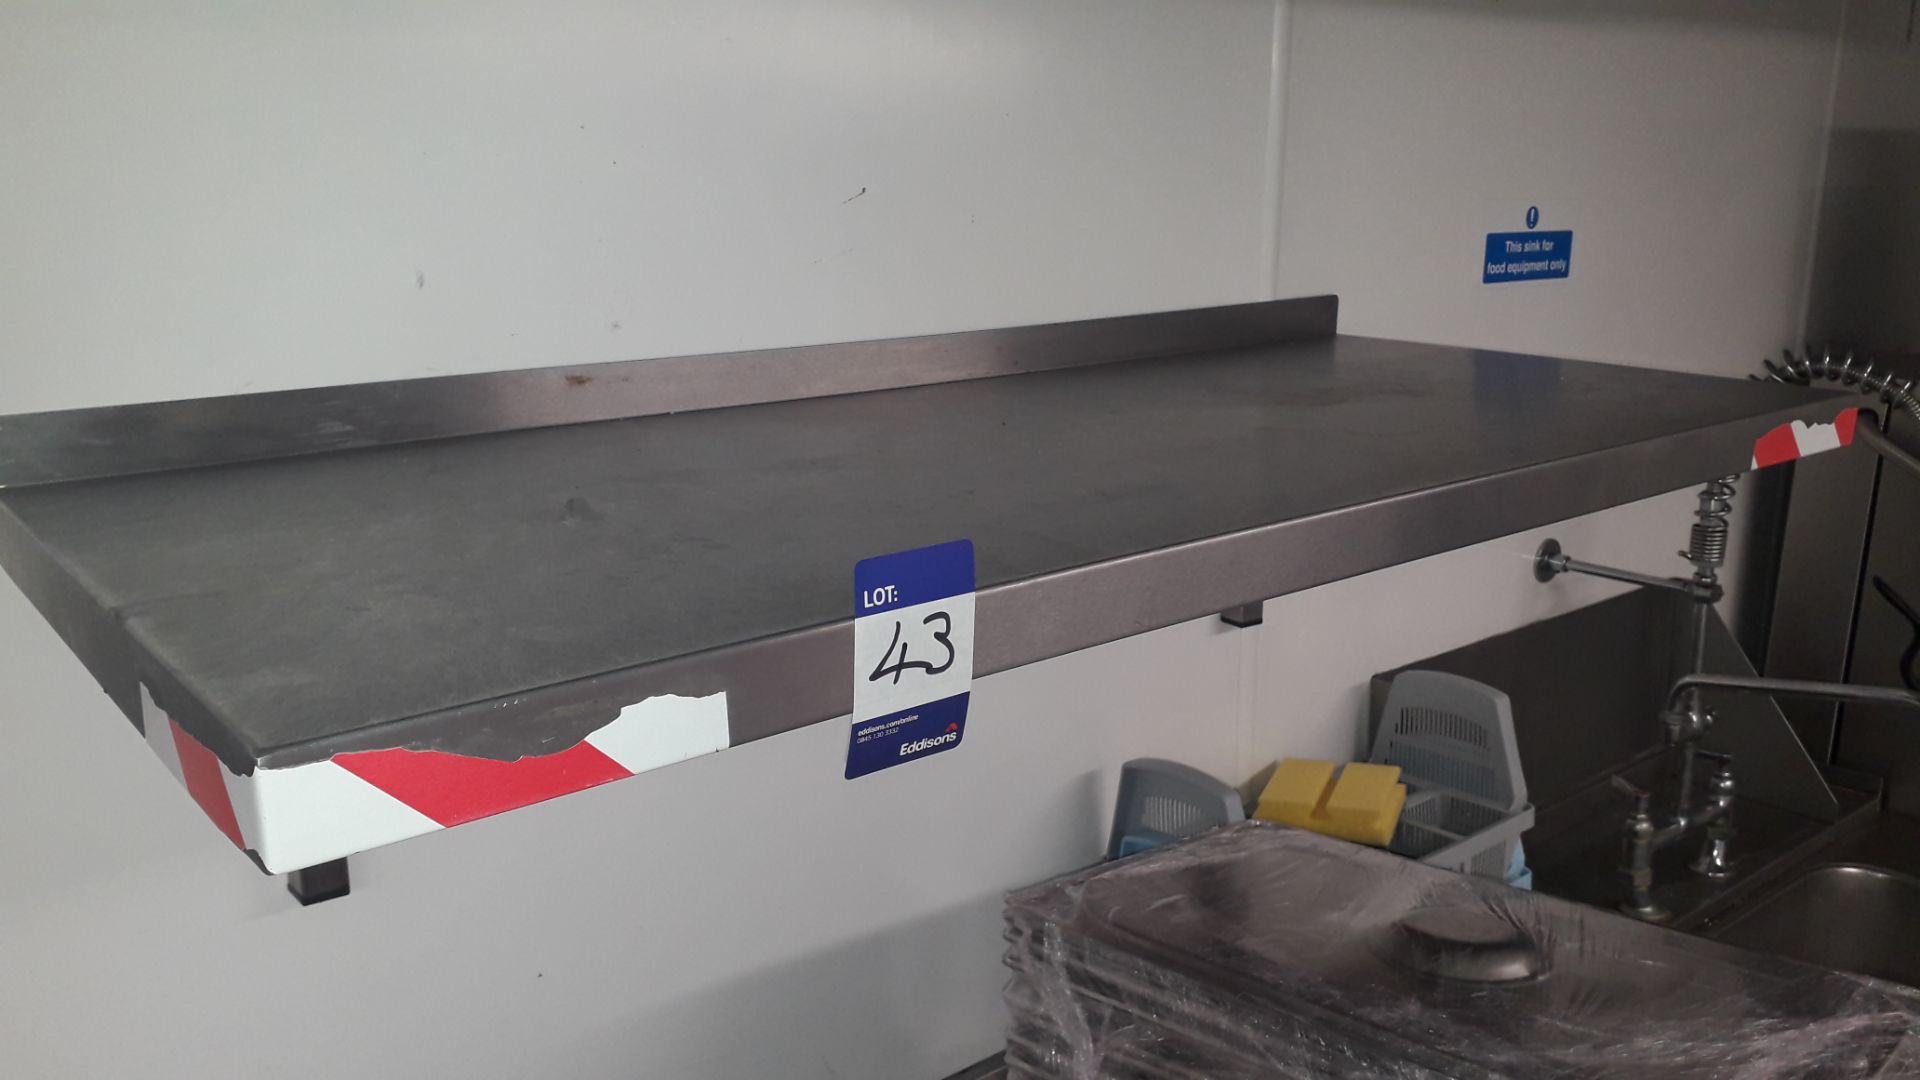 2 x Stainless Steel Wall Mount Shelves and Content